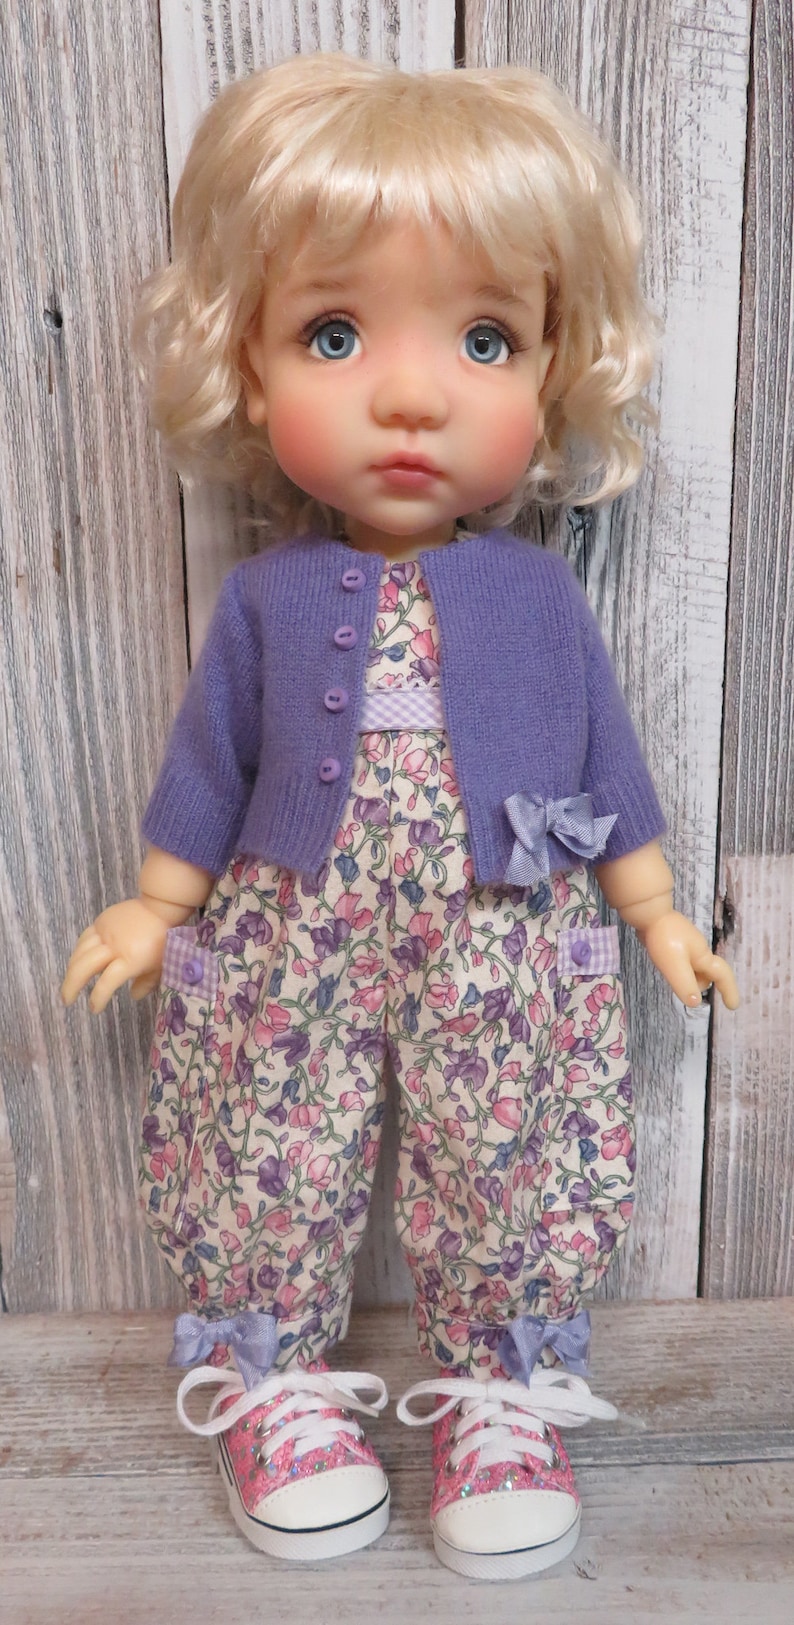 Pattern Meadowdolls Moppet 2 Sleeveless Dress, Sweater with Sleeve Options, Ruffled Bloomers, Romper for BJD 15 image 4